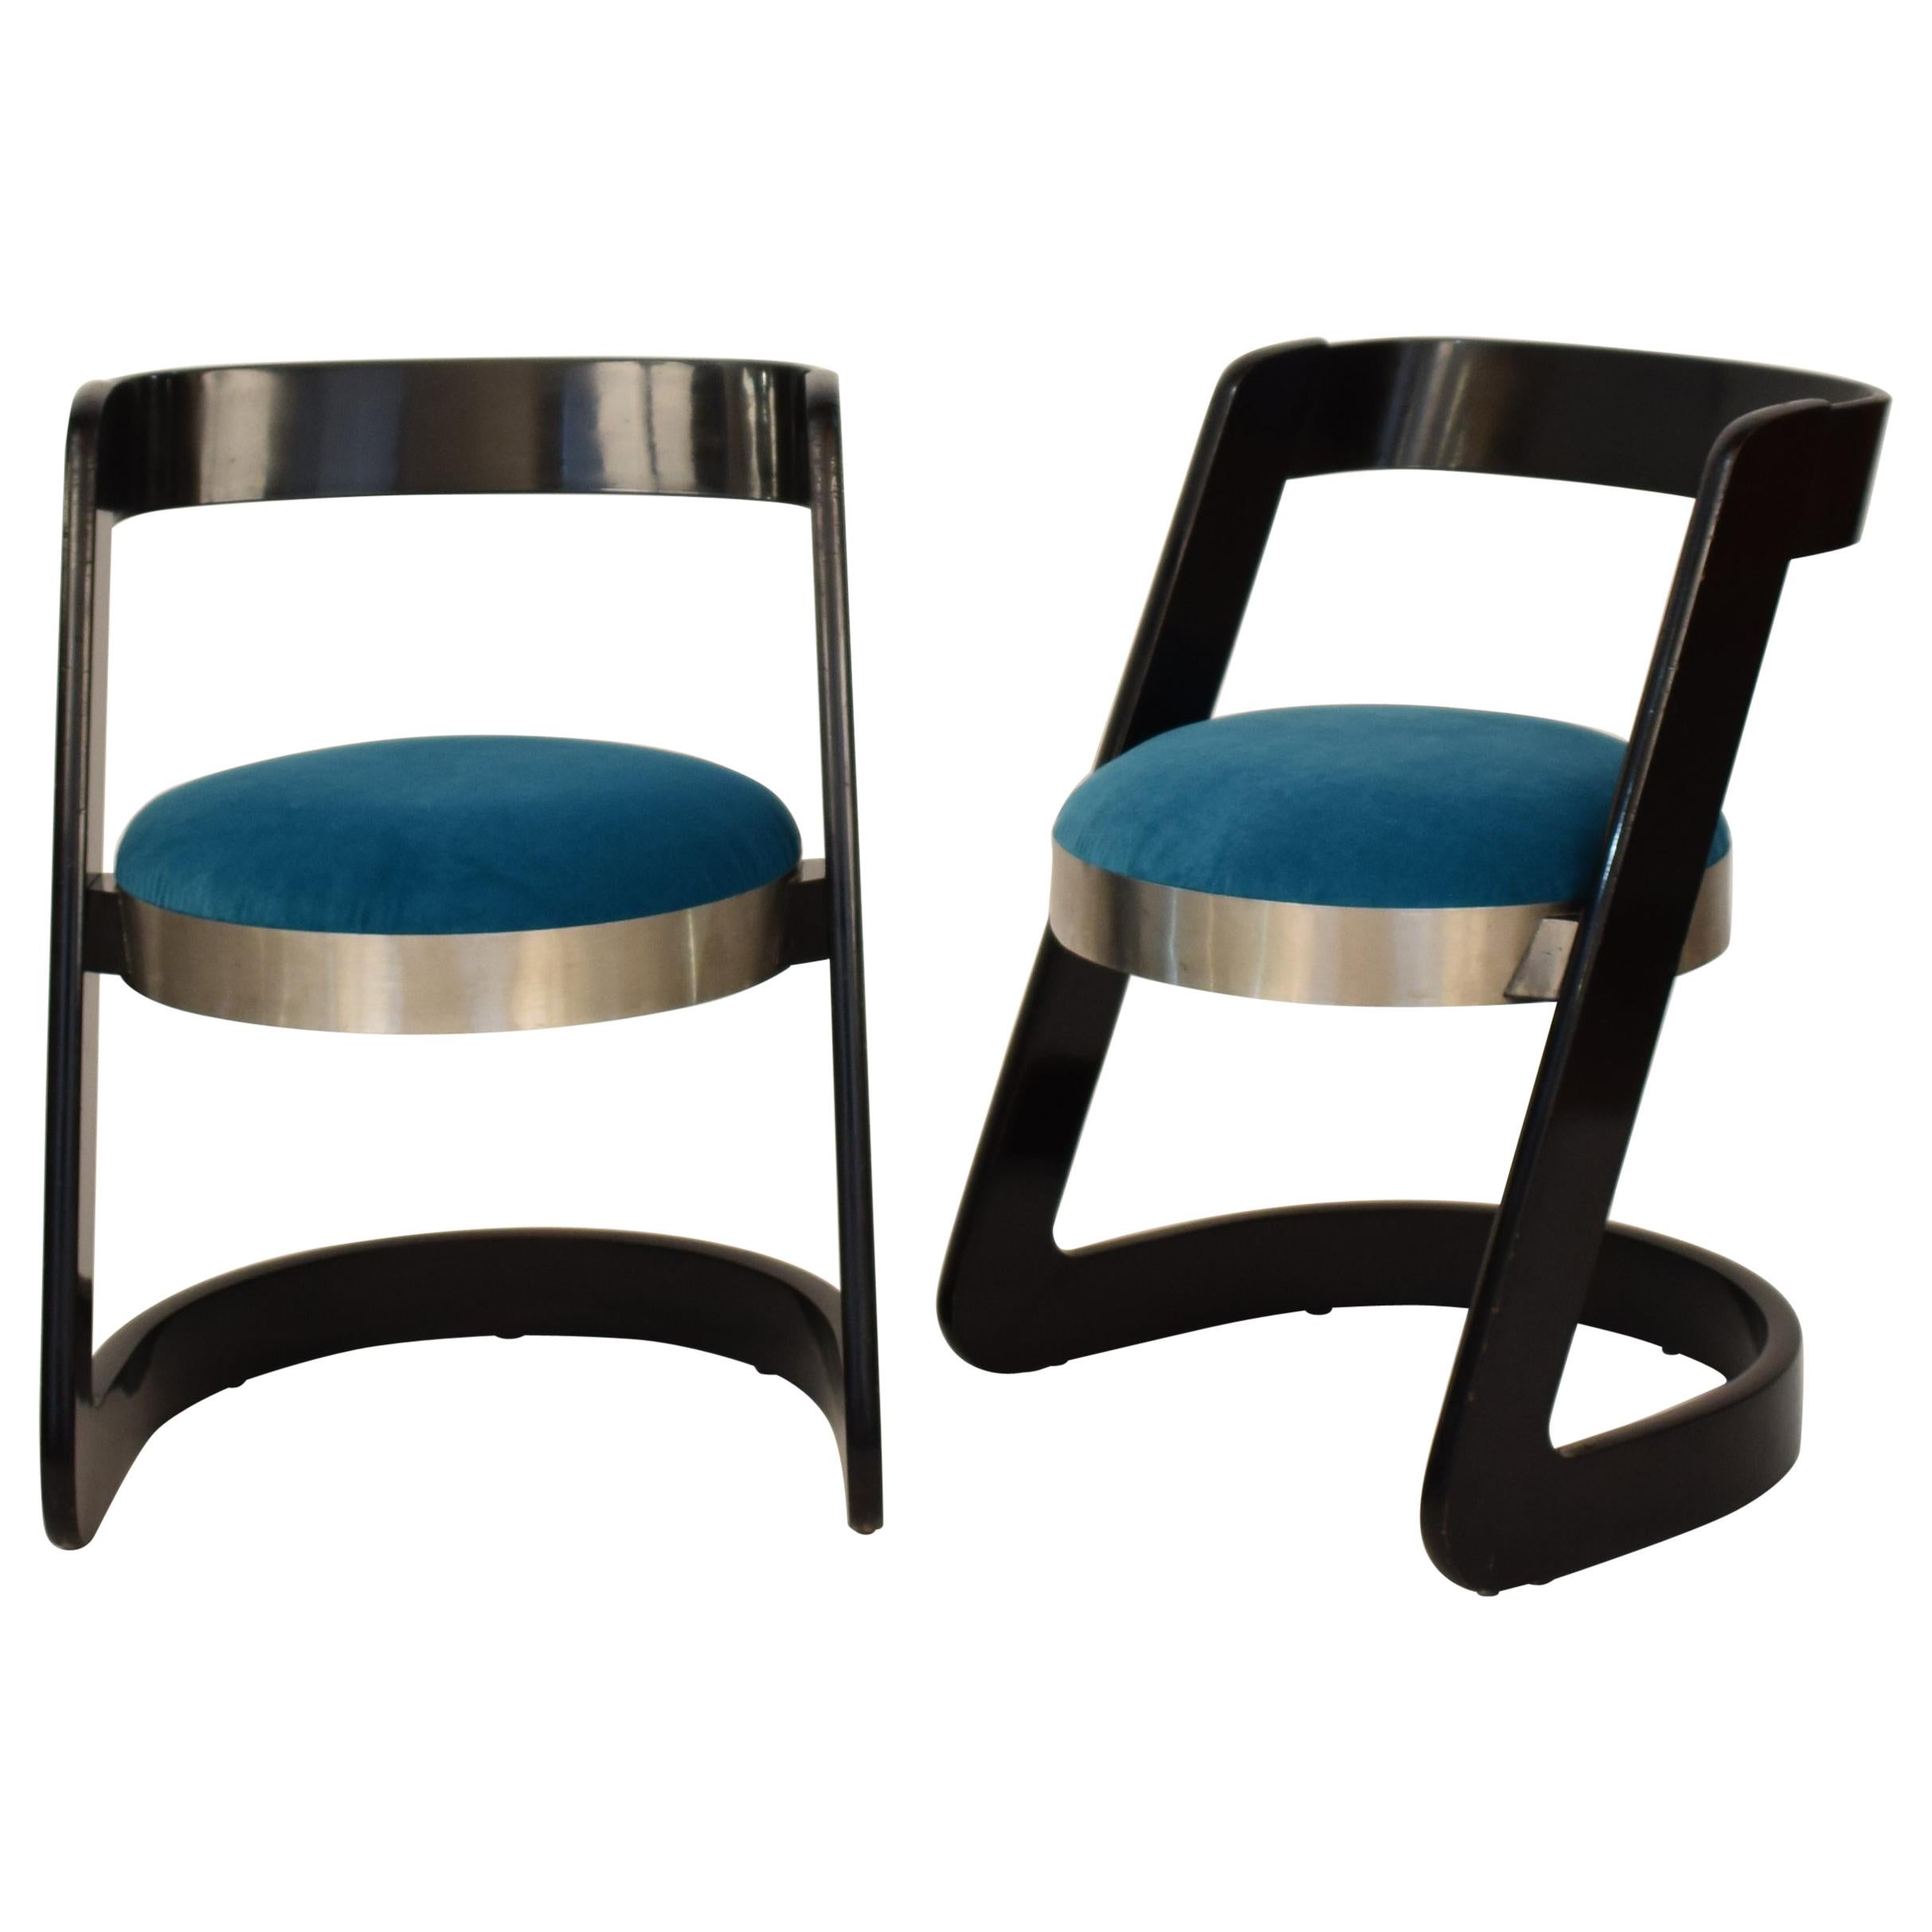 Two Chairs by Willy Rizzo Black Lacquered Wood and Velvet Seat for Mario Sabot